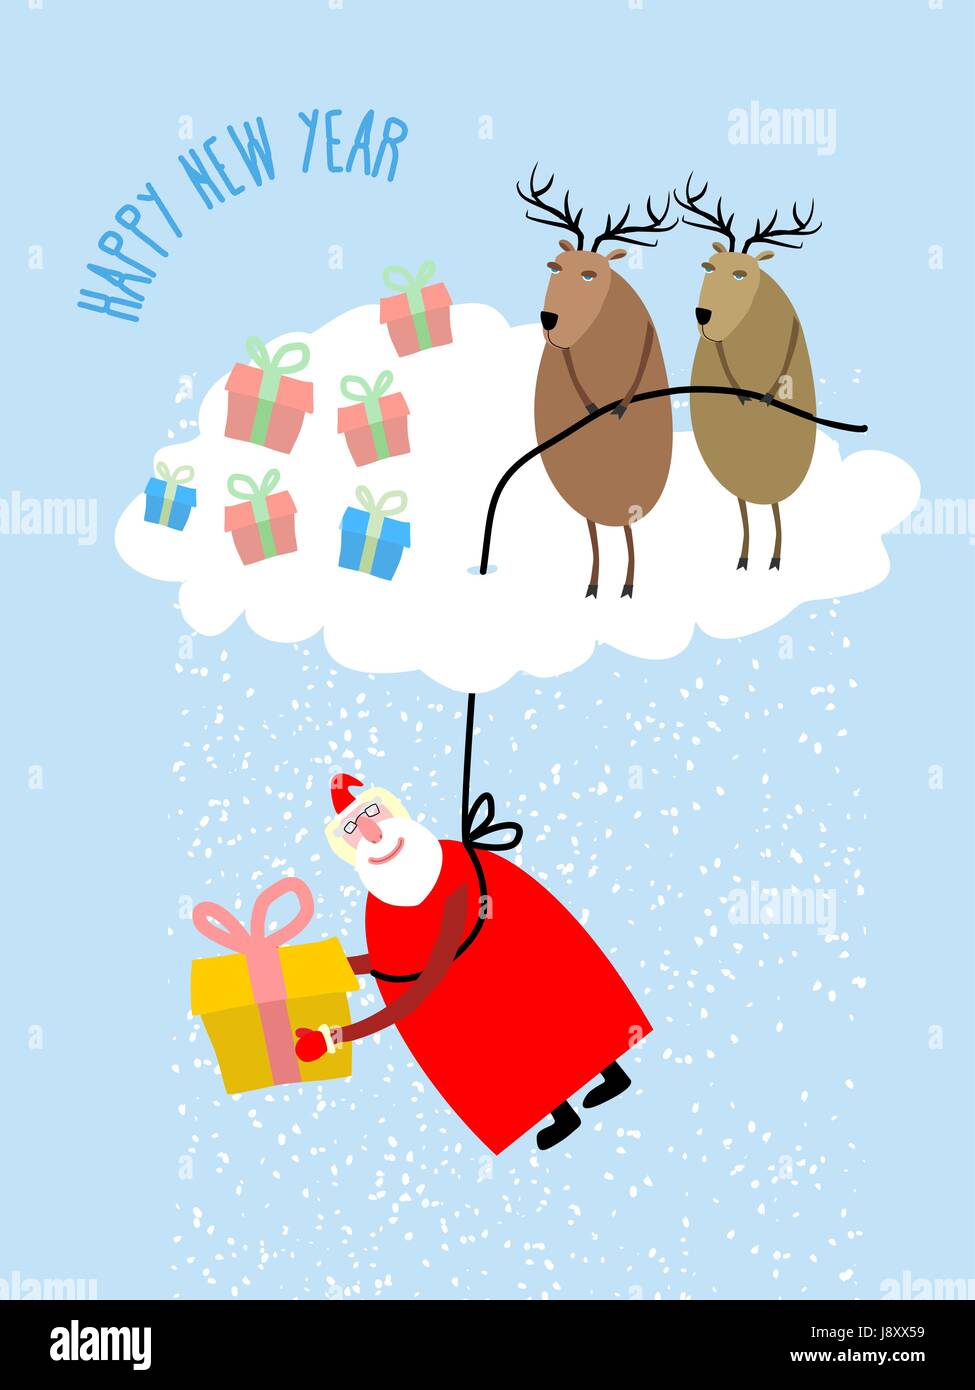 Santa Claus comes down on a rope and gives a gift. Deer on cloud cover Santa Claus. Snow from clouds. Christmas greeting card. Vector illustration for Stock Vector